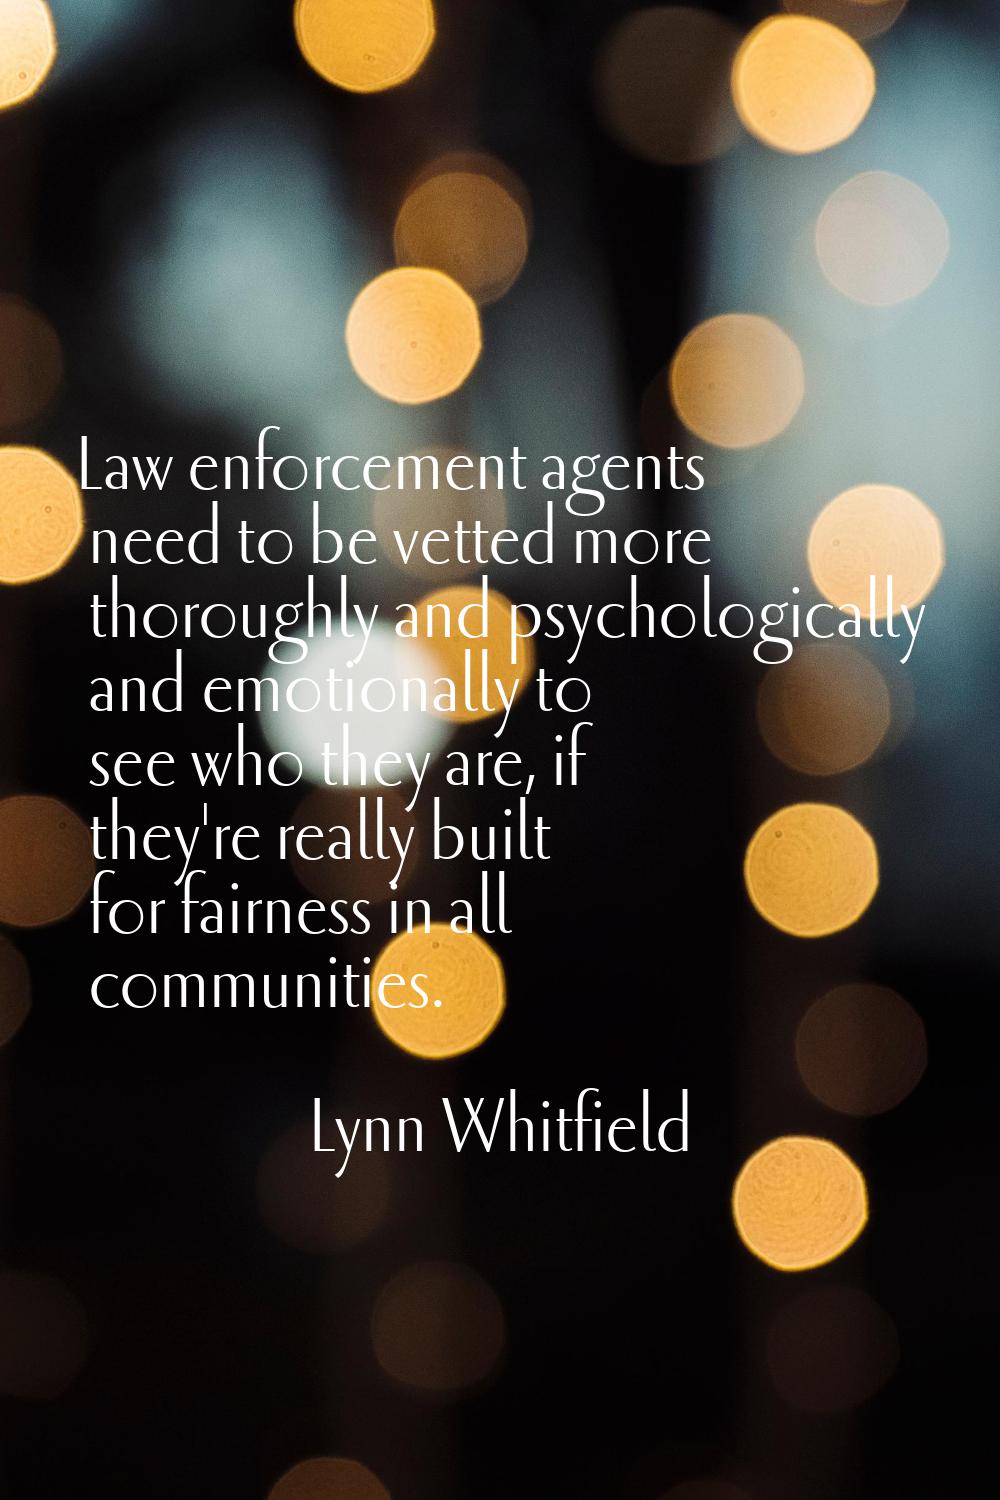 Law enforcement agents need to be vetted more thoroughly and psychologically and emotionally to see